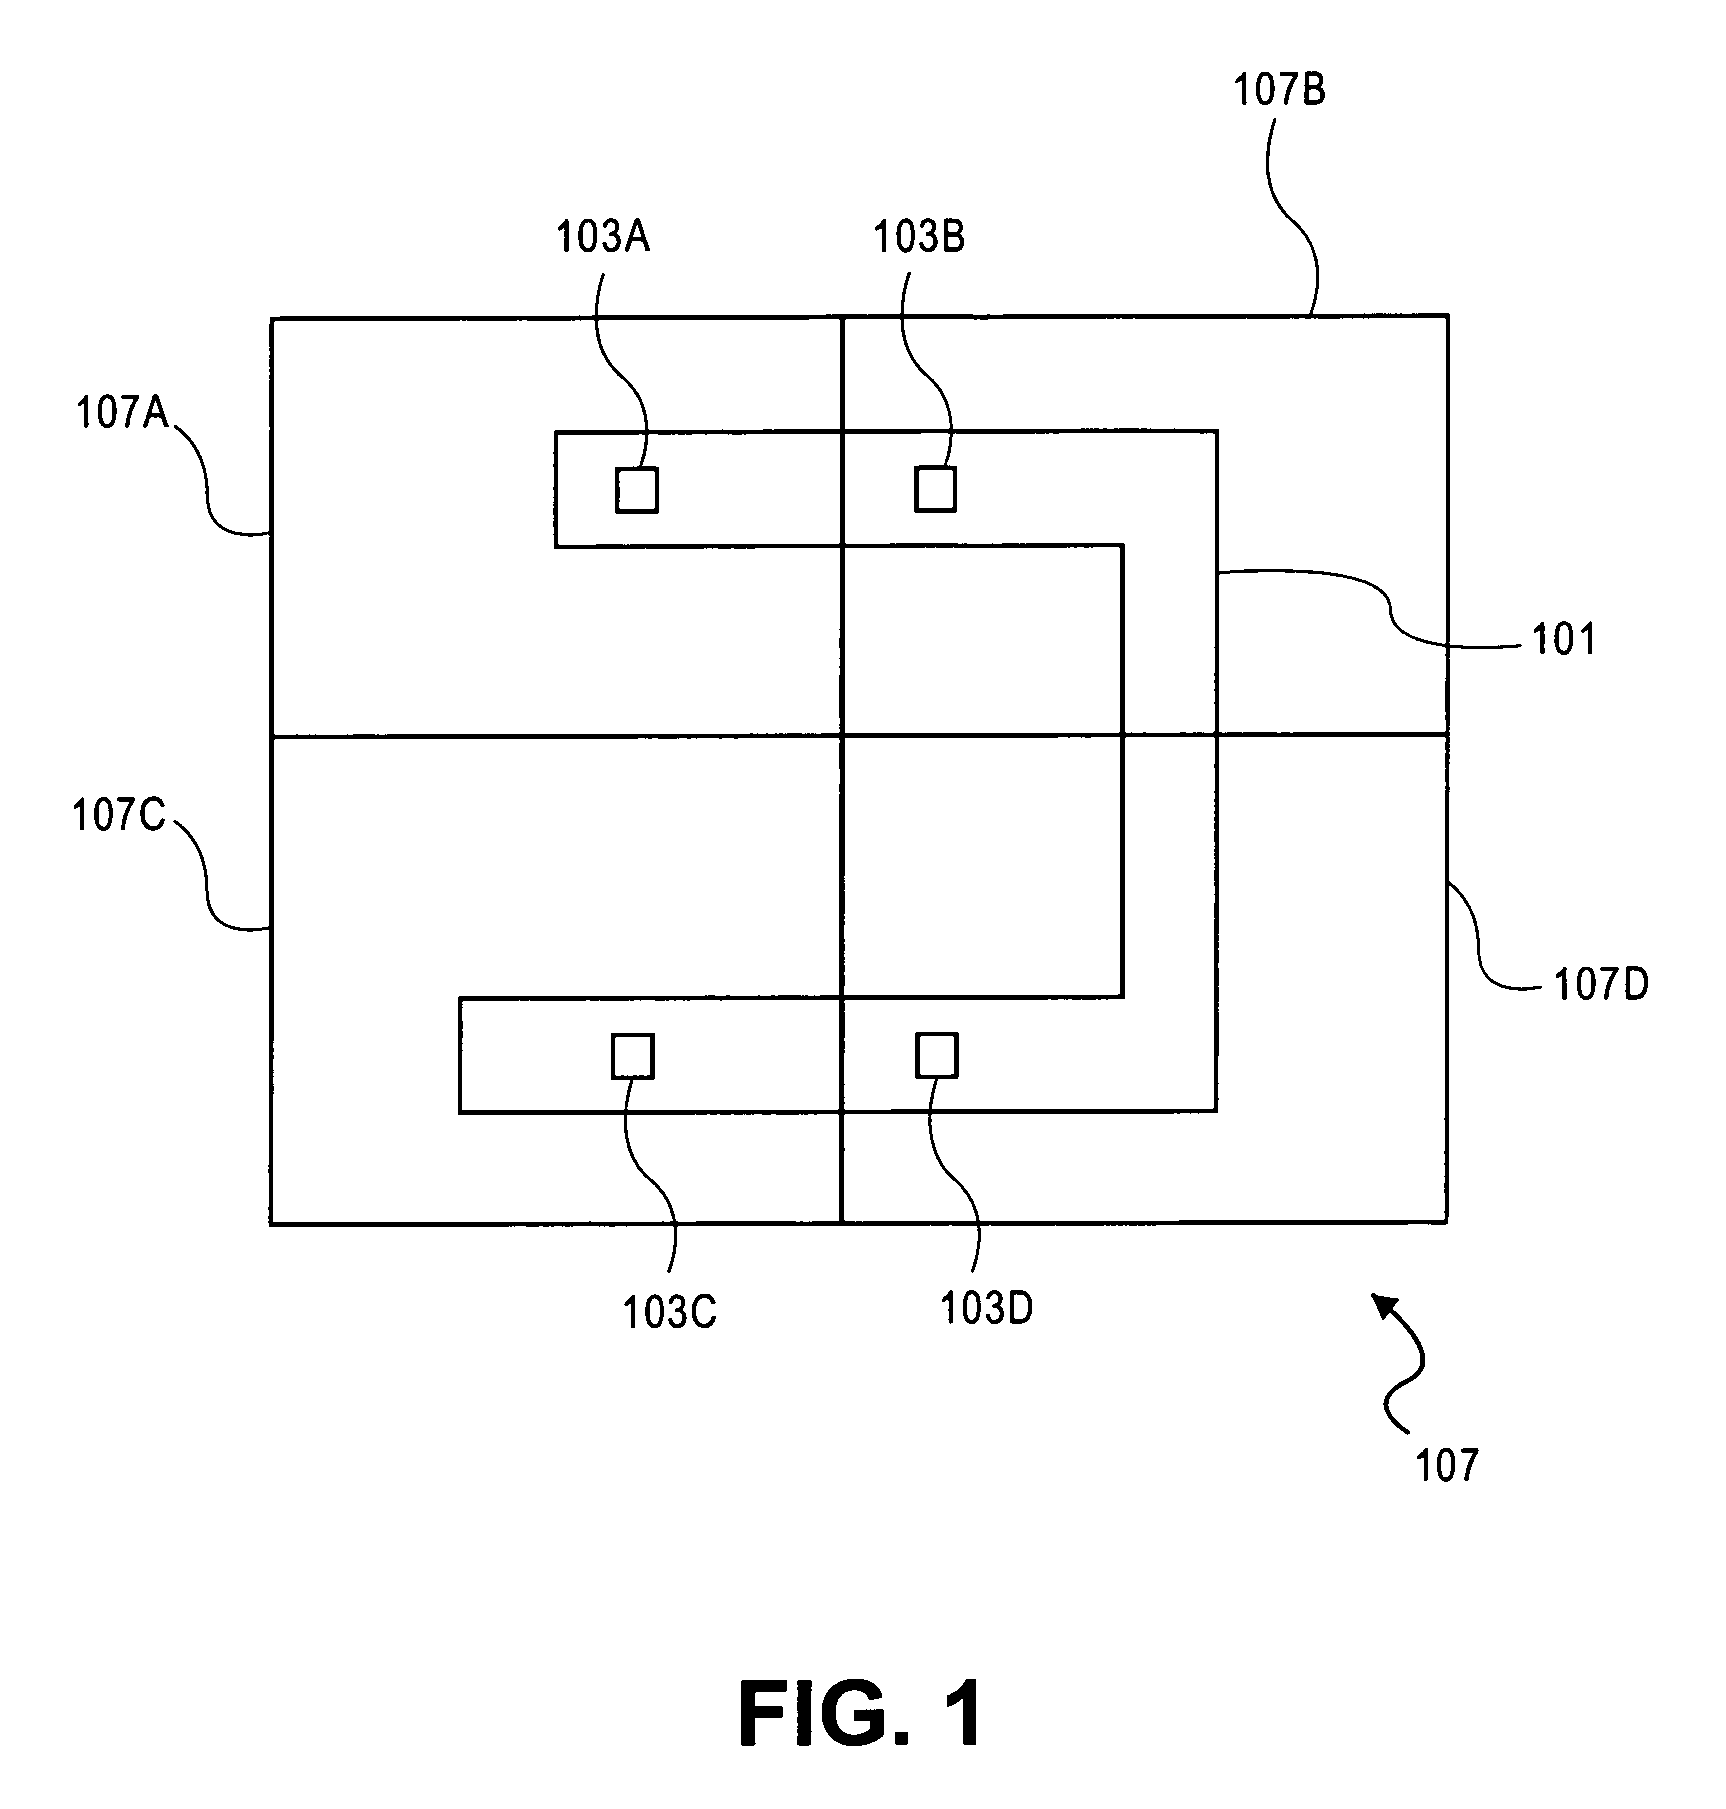 Method and system for parallel processing of IC design layouts